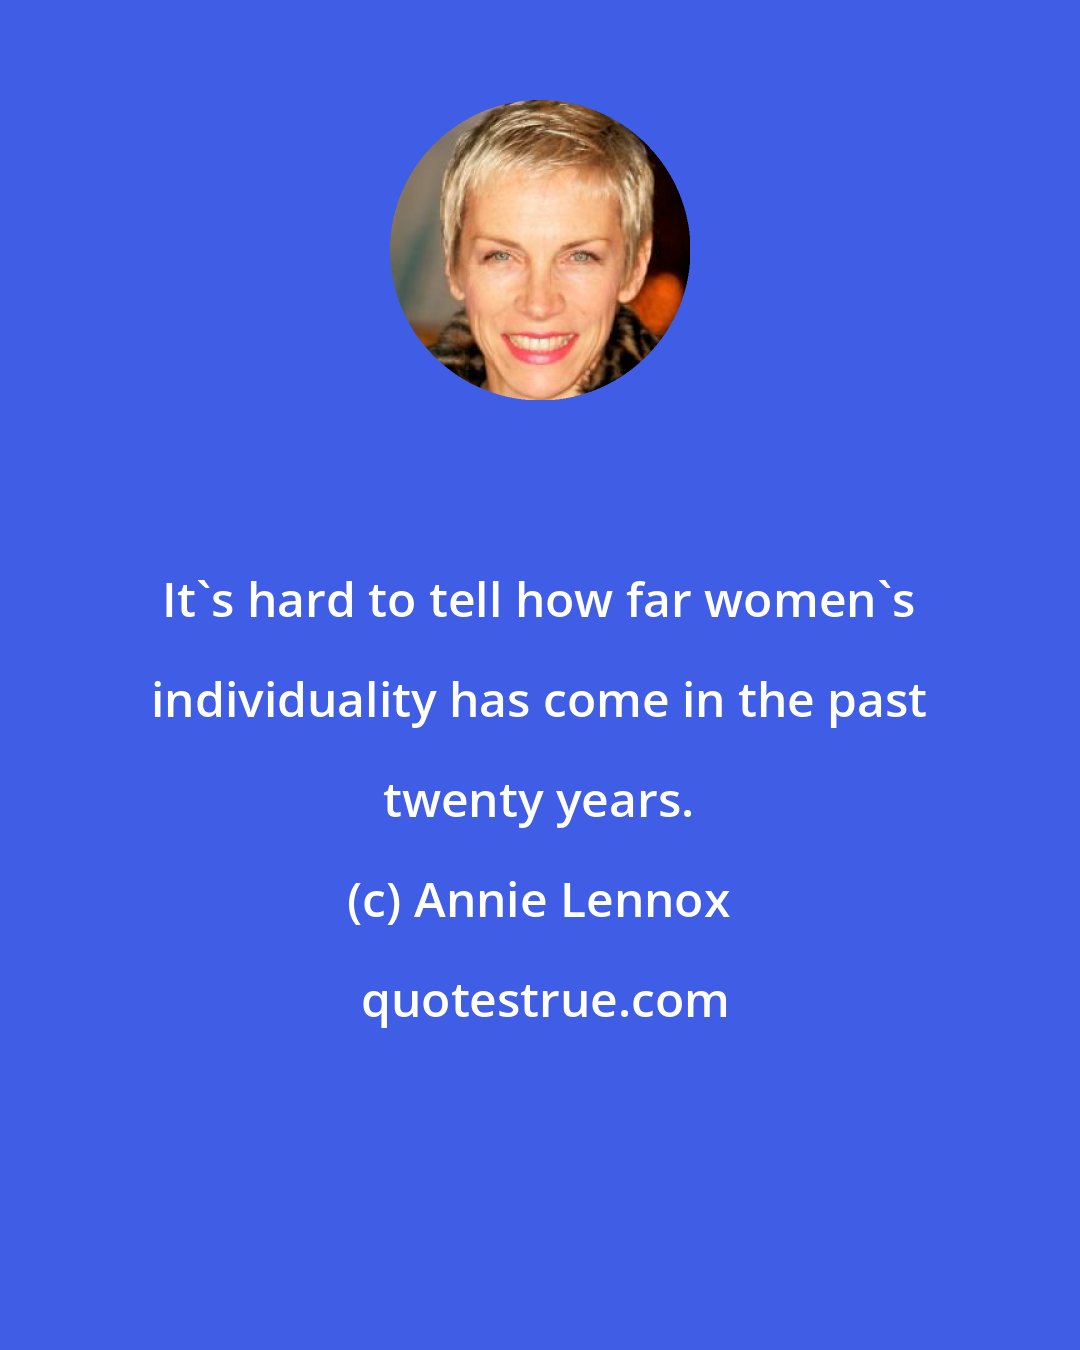 Annie Lennox: It's hard to tell how far women's individuality has come in the past twenty years.